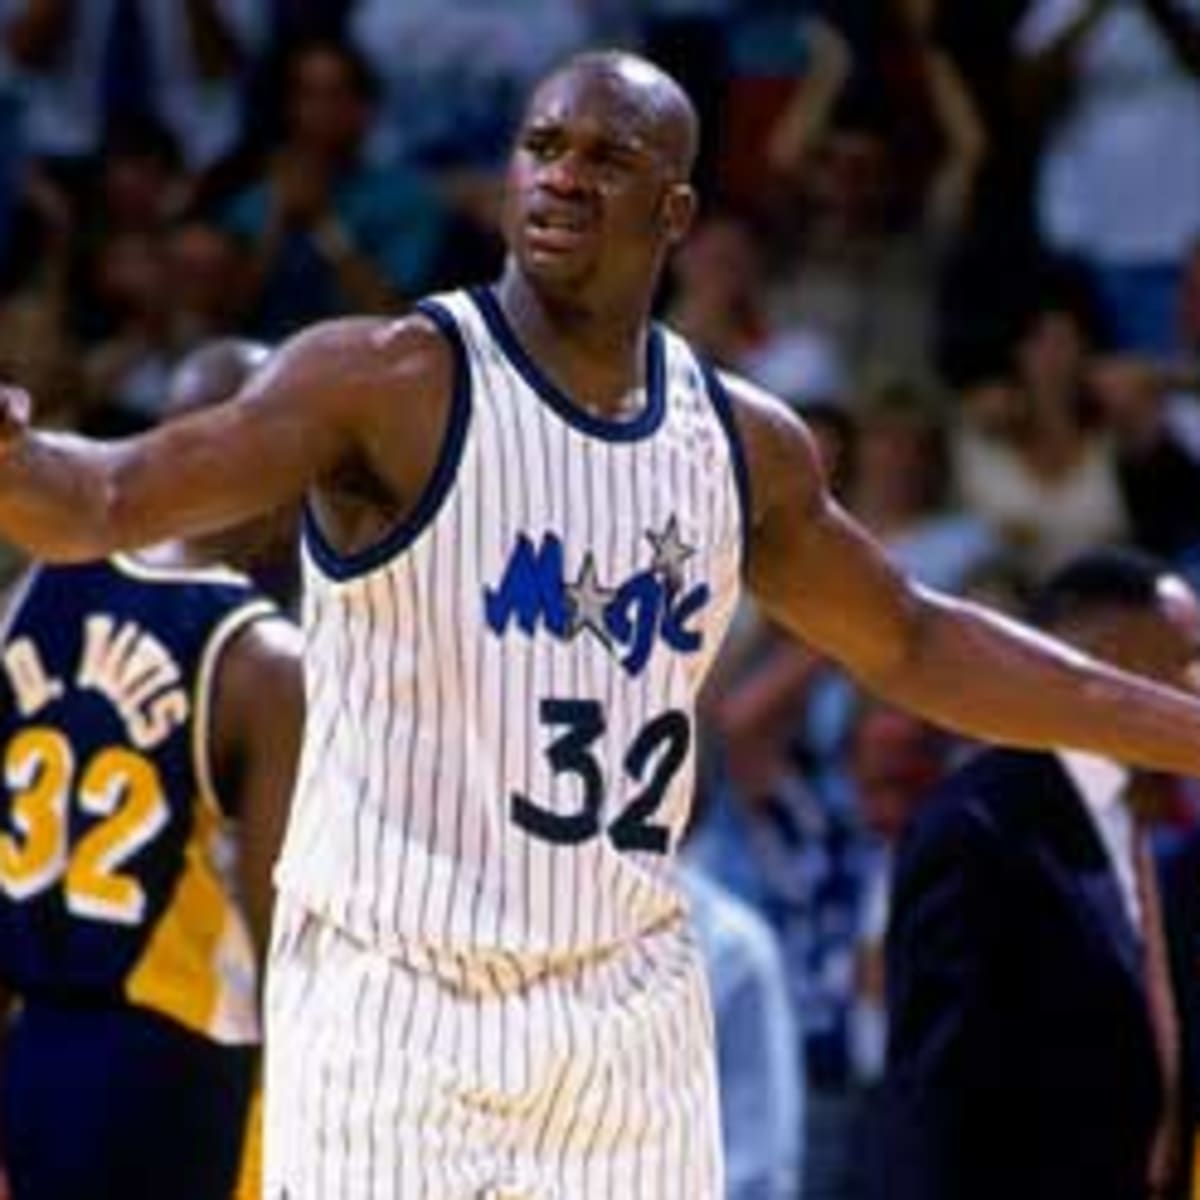 Who is Shaq and when did he retire?